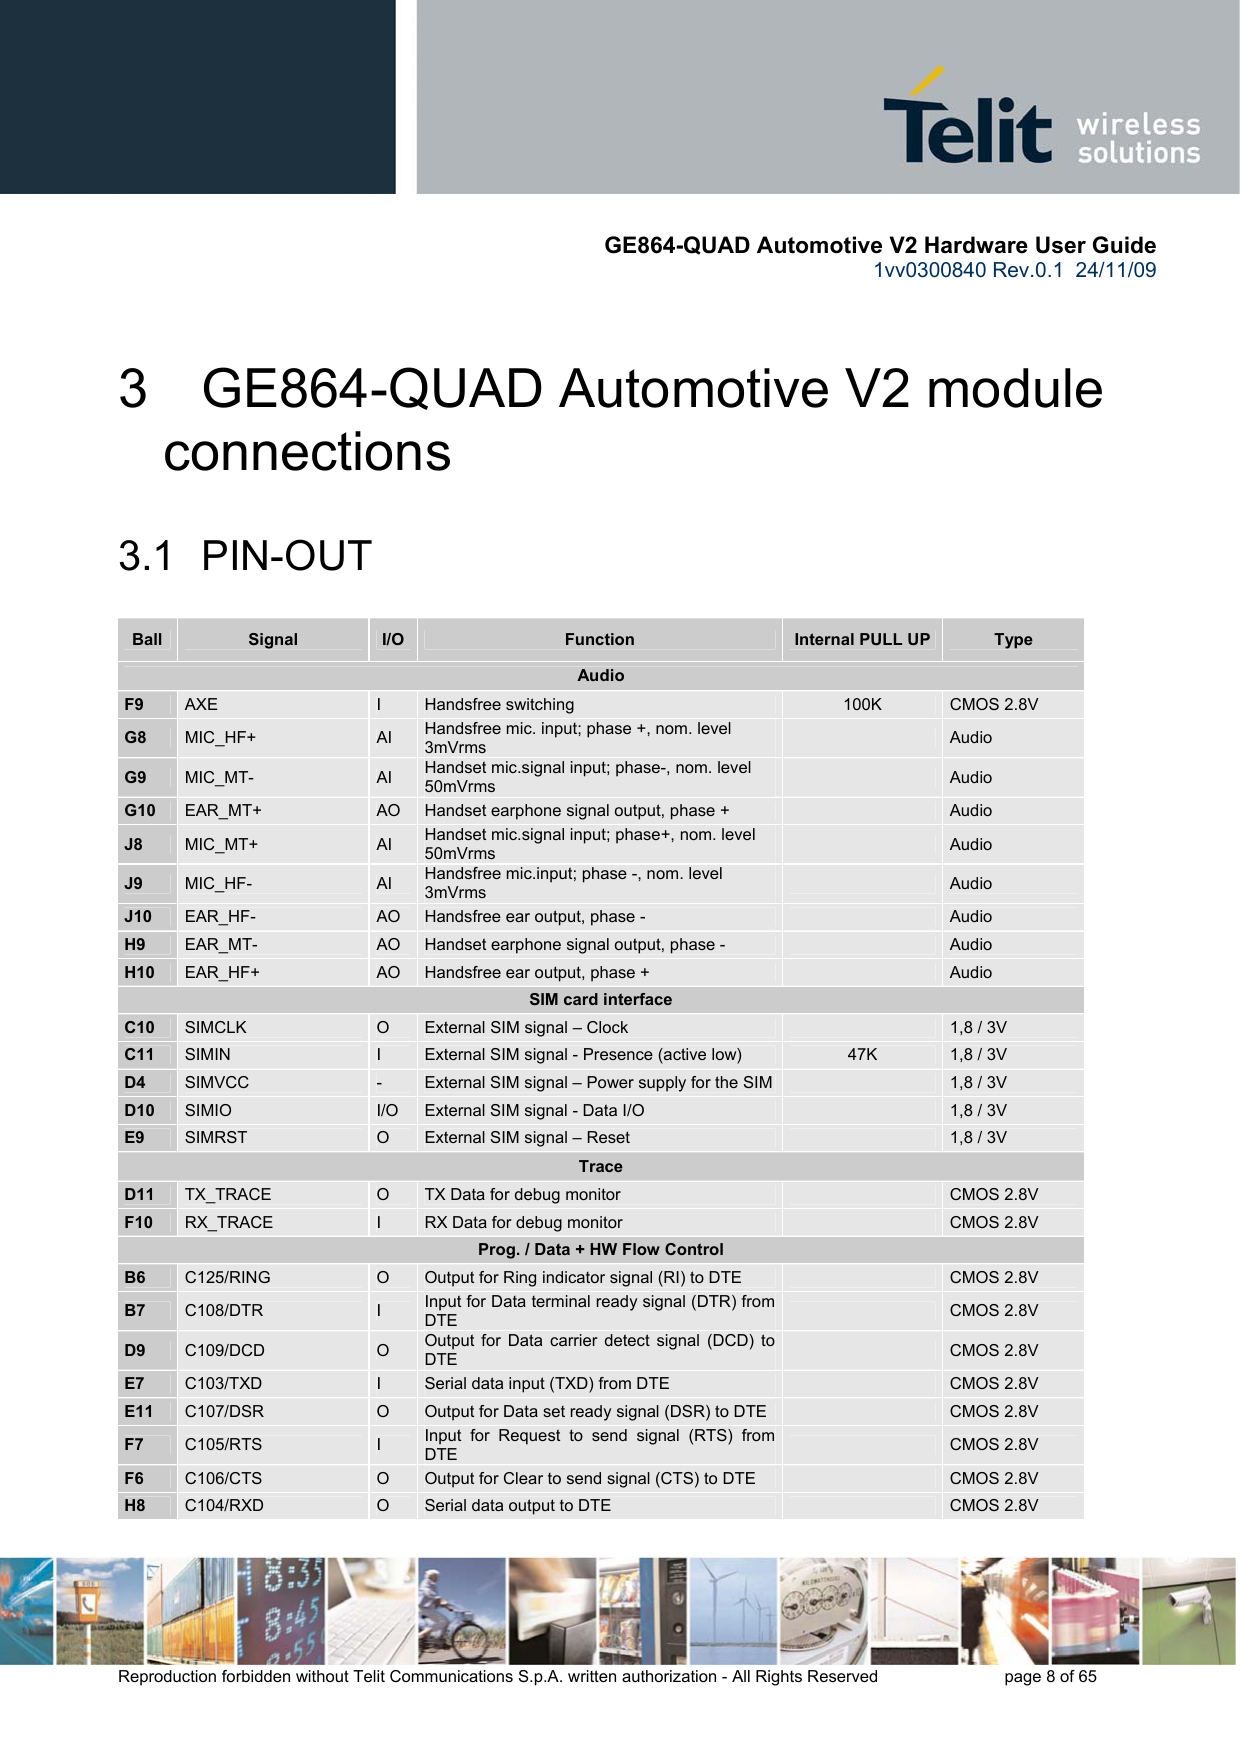       GE864-QUAD Automotive V2 Hardware User Guide 1vv0300840 Rev.0.1  24/11/09      Reproduction forbidden without Telit Communications S.p.A. written authorization - All Rights Reserved    page 8 of 65  3  GE864-QUAD Automotive V2 module connections  3.1  PIN-OUT Ball  Signal  I/O  Function  Internal PULL UP  Type Audio F9  AXE  I  Handsfree switching   100K  CMOS 2.8V G8  MIC_HF+  AI  Handsfree mic. input; phase +, nom. level 3mVrms     Audio G9  MIC_MT-  AI  Handset mic.signal input; phase-, nom. level 50mVrms     Audio G10  EAR_MT+  AO  Handset earphone signal output, phase +     Audio J8  MIC_MT+  AI  Handset mic.signal input; phase+, nom. level 50mVrms     Audio J9  MIC_HF-  AI  Handsfree mic.input; phase -, nom. level 3mVrms     Audio J10  EAR_HF-  AO  Handsfree ear output, phase -     Audio H9  EAR_MT-  AO  Handset earphone signal output, phase -     Audio H10  EAR_HF+  AO  Handsfree ear output, phase +     Audio SIM card interface C10  SIMCLK  O  External SIM signal – Clock     1,8 / 3V C11  SIMIN  I  External SIM signal - Presence (active low)  47K  1,8 / 3V D4  SIMVCC  -  External SIM signal – Power supply for the SIM     1,8 / 3V D10  SIMIO  I/O  External SIM signal - Data I/O     1,8 / 3V E9  SIMRST  O  External SIM signal – Reset     1,8 / 3V Trace D11  TX_TRACE  O  TX Data for debug monitor      CMOS 2.8V F10  RX_TRACE  I  RX Data for debug monitor      CMOS 2.8V Prog. / Data + HW Flow Control B6  C125/RING  O  Output for Ring indicator signal (RI) to DTE      CMOS 2.8V B7  C108/DTR  I  Input for Data terminal ready signal (DTR) from DTE       CMOS 2.8V D9  C109/DCD  O  Output for Data carrier detect signal (DCD) to DTE      CMOS 2.8V E7  C103/TXD  I  Serial data input (TXD) from DTE      CMOS 2.8V E11  C107/DSR  O  Output for Data set ready signal (DSR) to DTE     CMOS 2.8V F7  C105/RTS  I  Input for Request to send signal (RTS) from DTE      CMOS 2.8V F6  C106/CTS  O  Output for Clear to send signal (CTS) to DTE      CMOS 2.8V H8  C104/RXD  O  Serial data output to DTE      CMOS 2.8V 